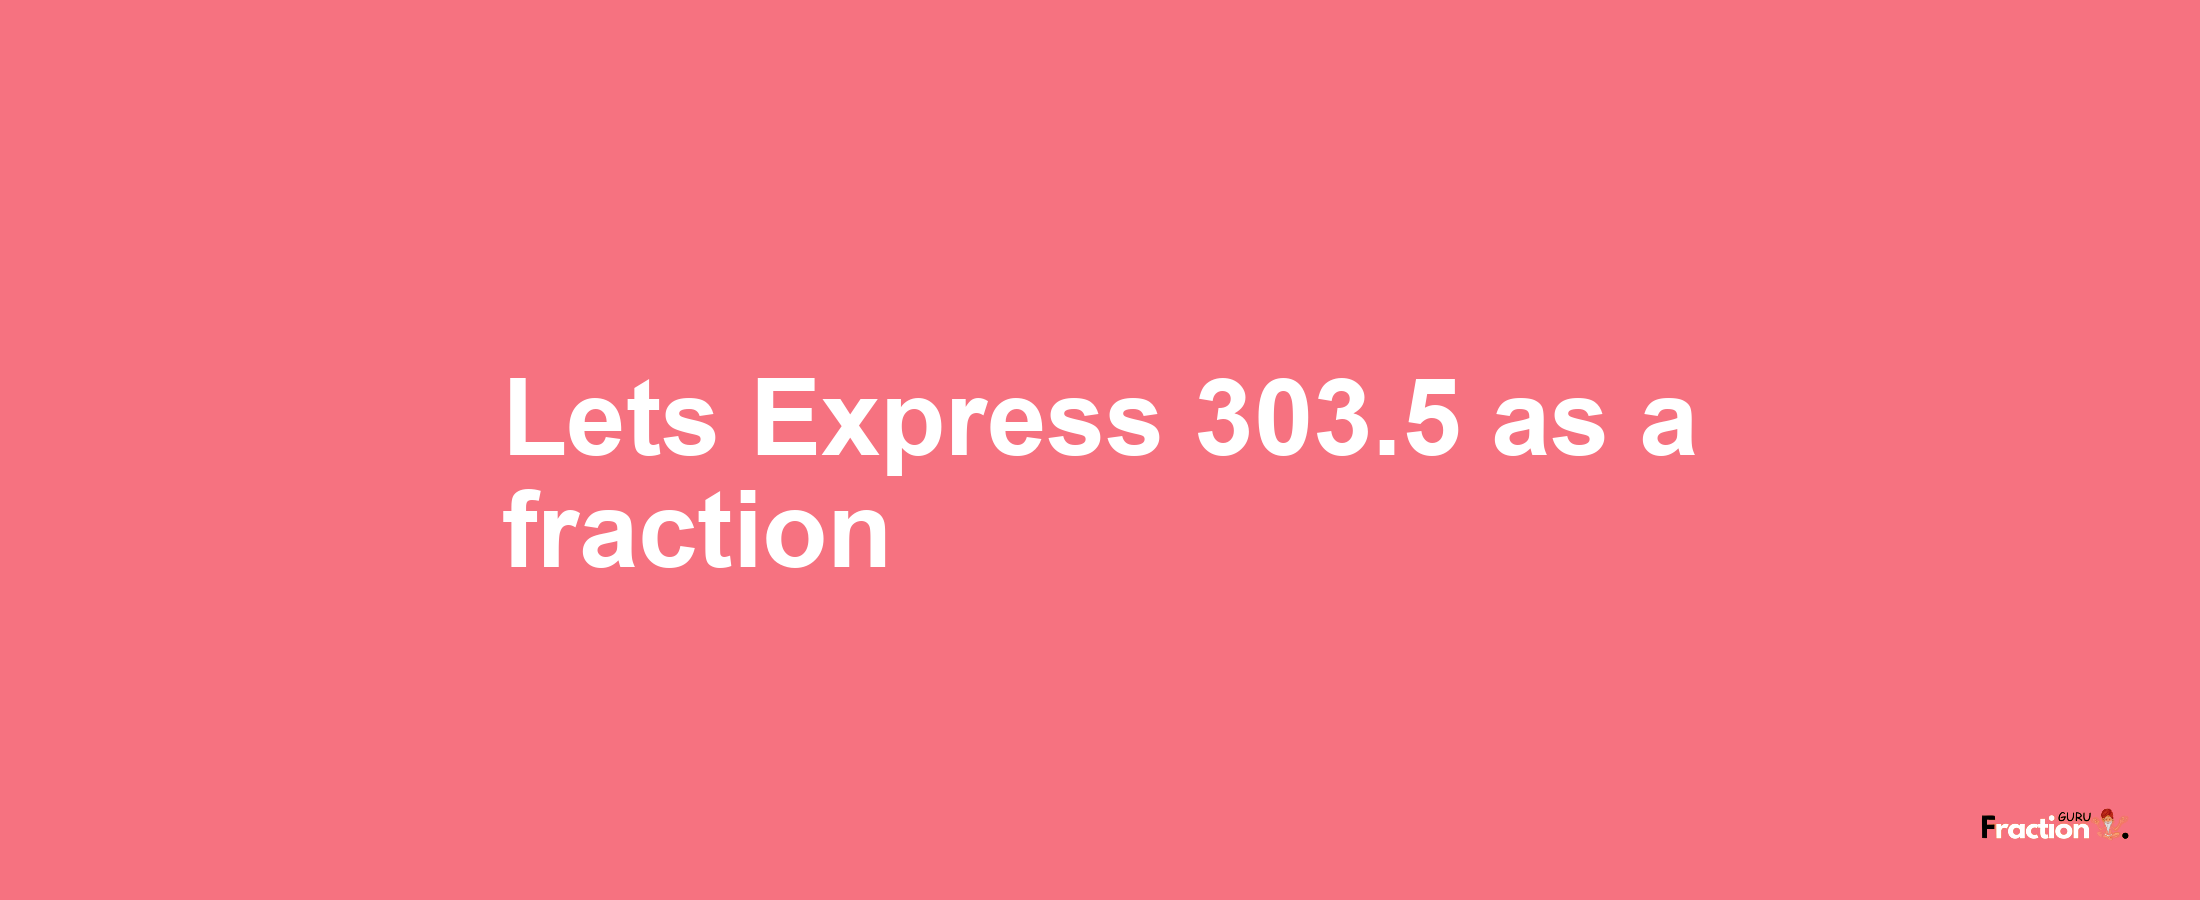 Lets Express 303.5 as afraction